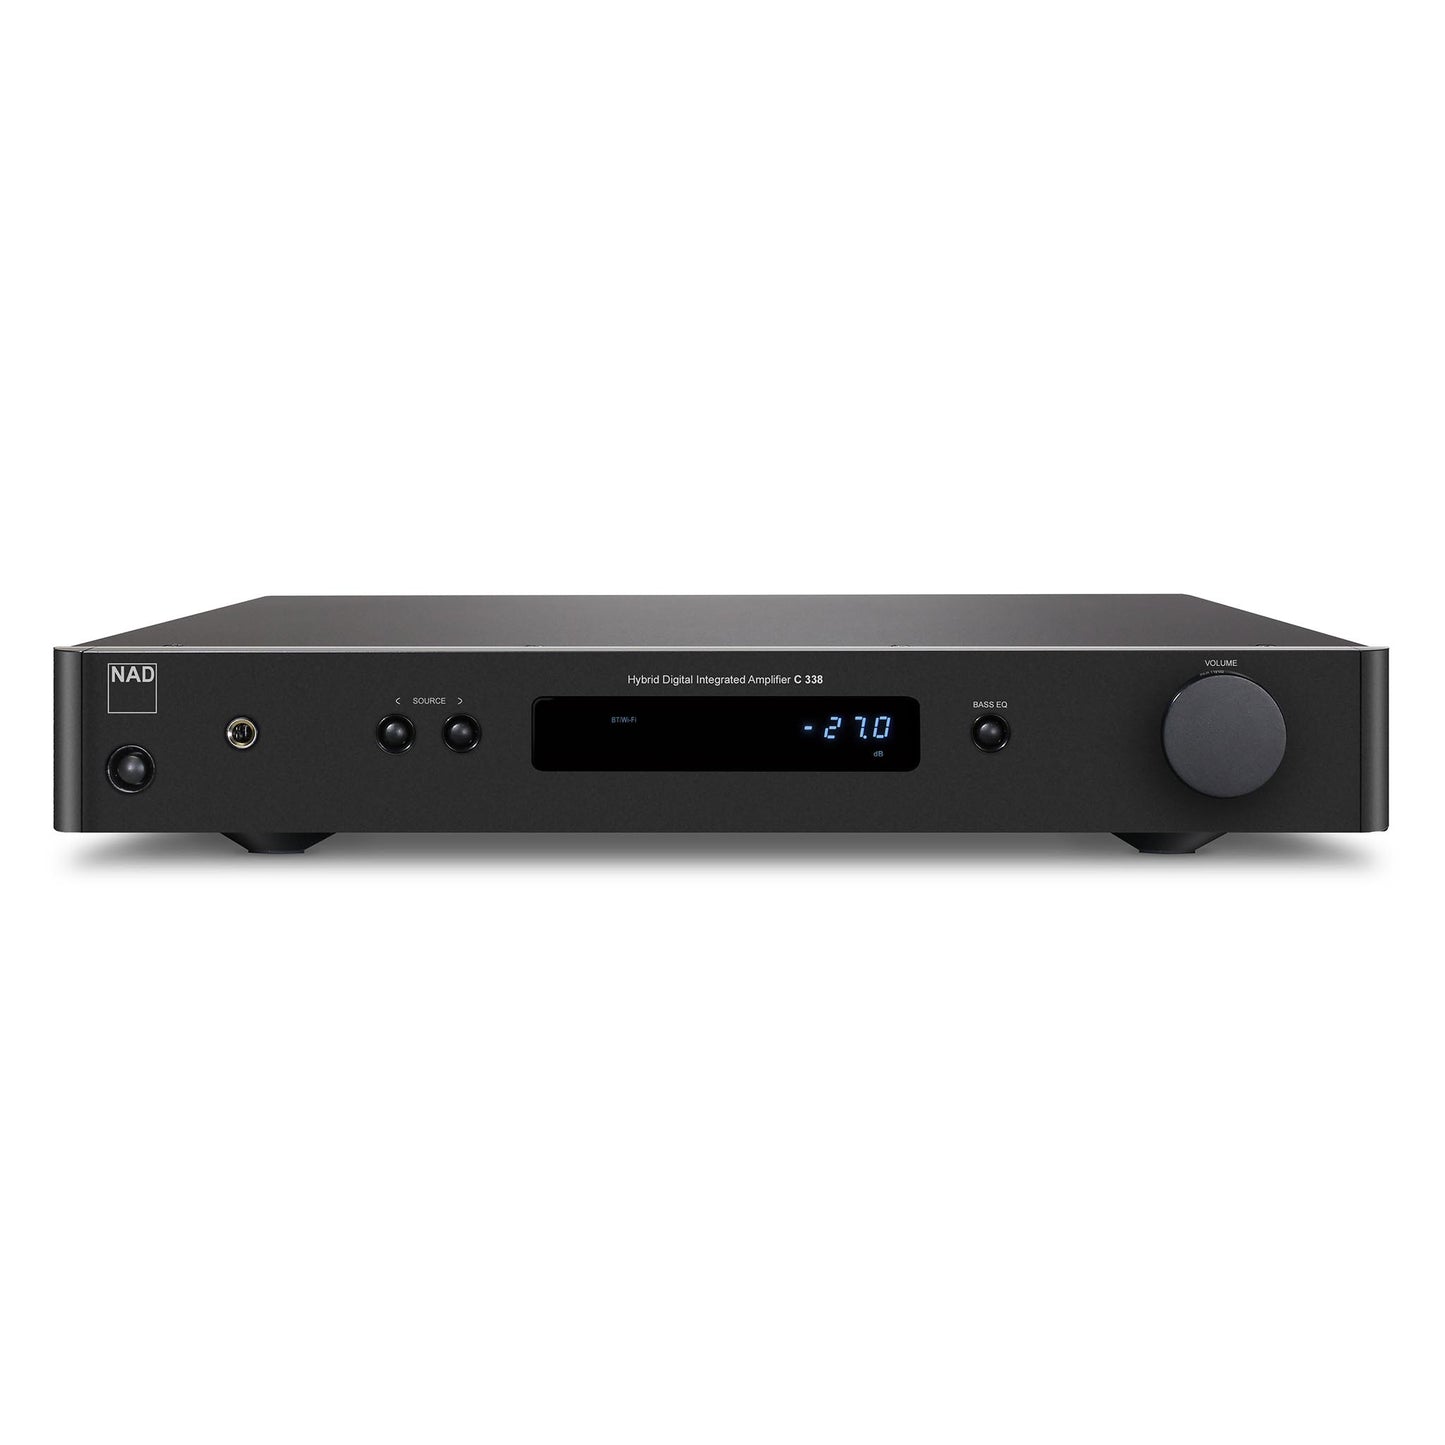 NAD C 338 Integrated Amplifier / DAC